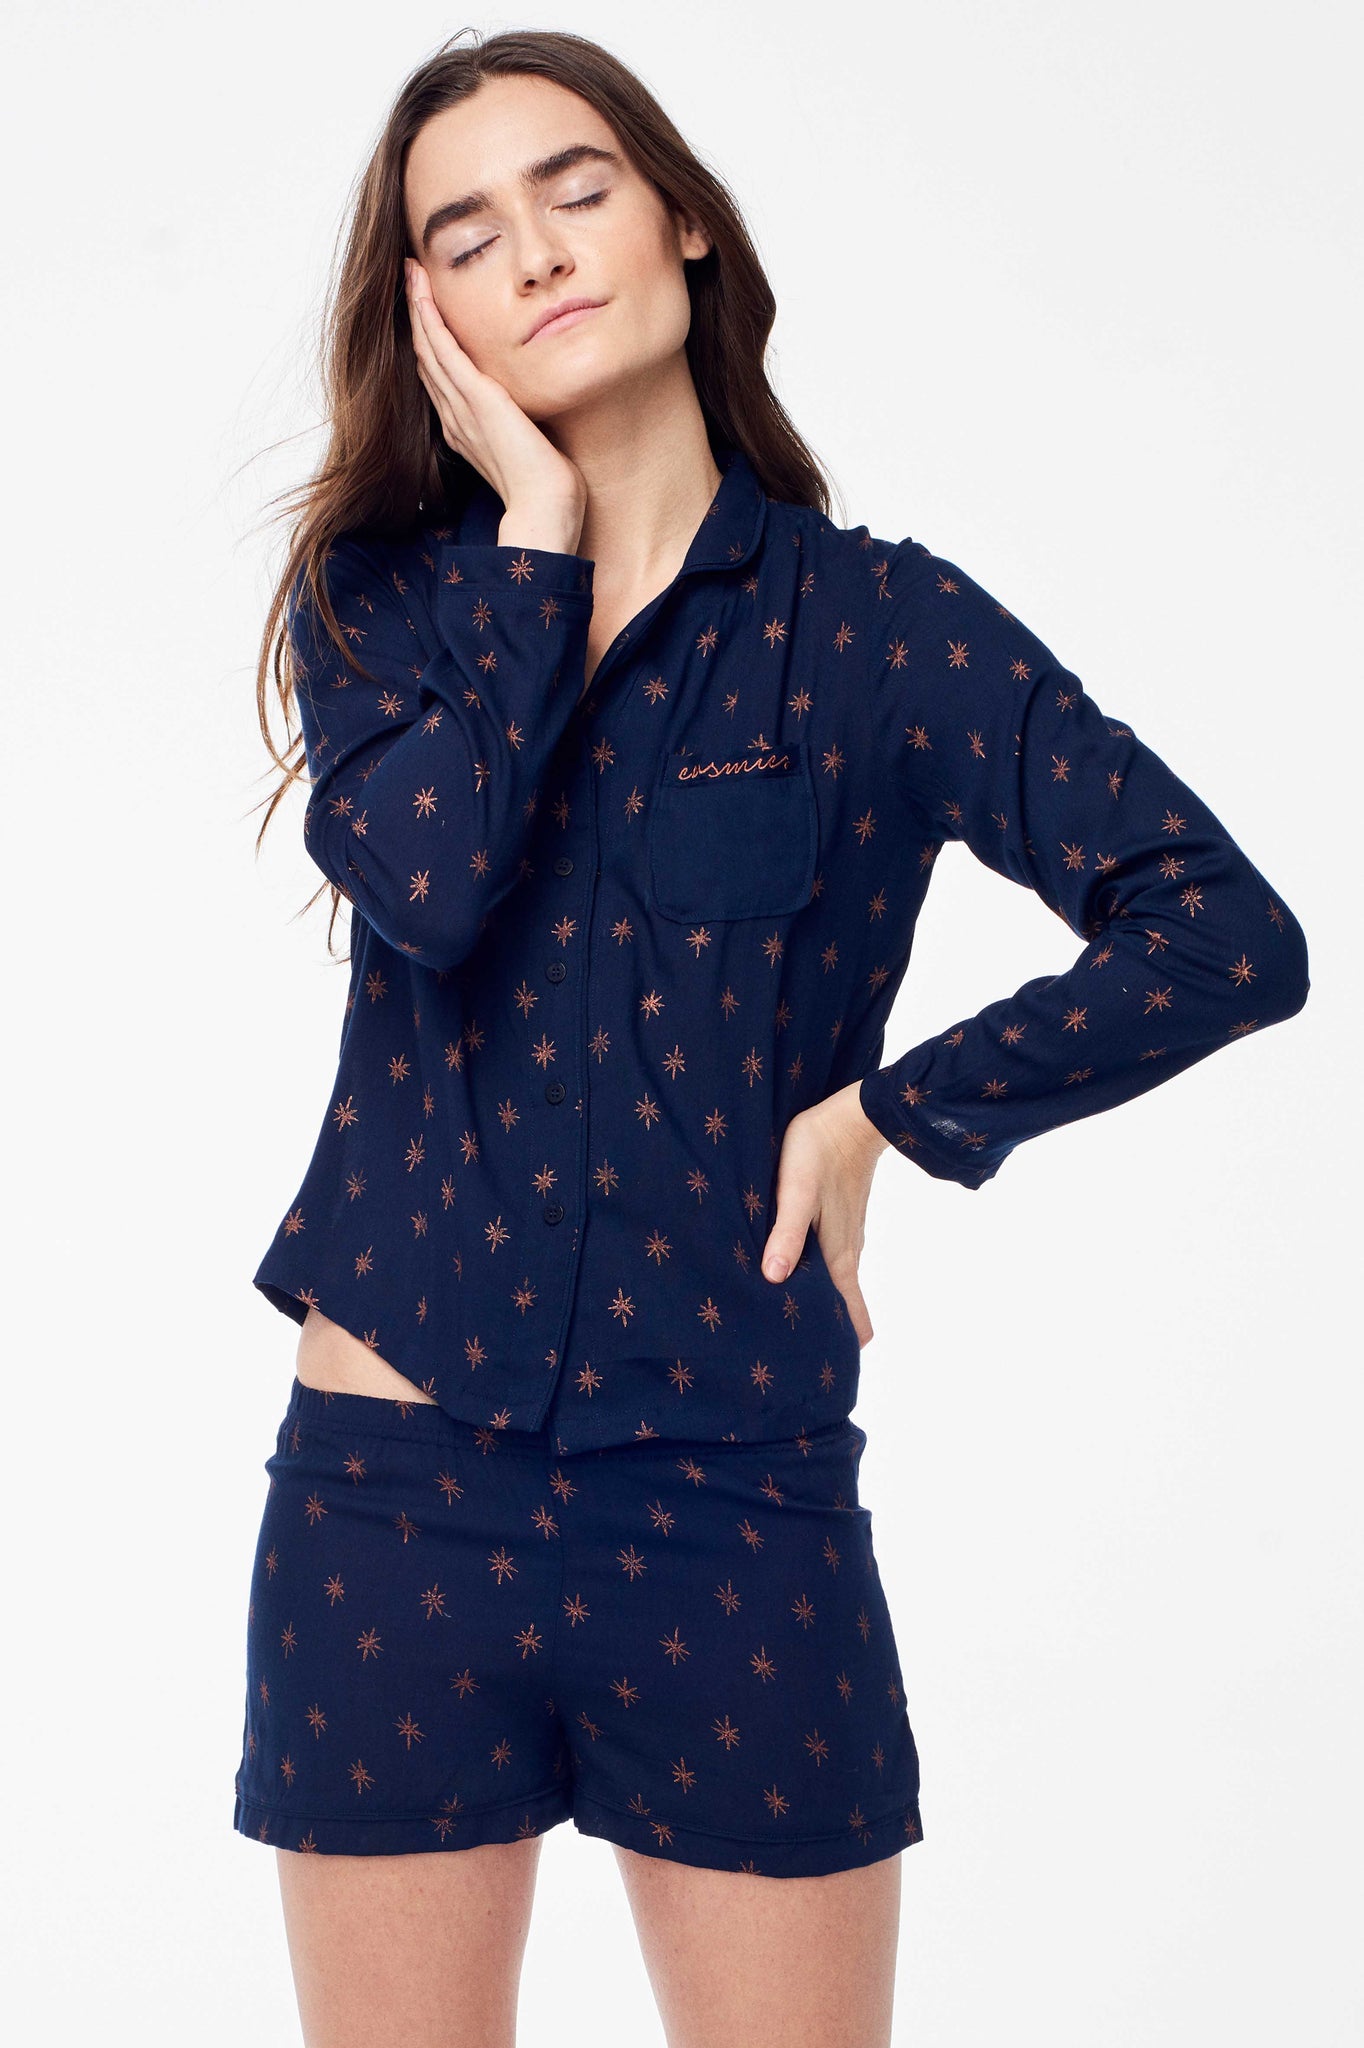 Accompany Exclusive Sitting Pretty Holiday 2017 Painted Stars PJ Set in Navy and Rose Gold. Printed cotton PJ set of 2. Long sleeved pajama style button up top with piping. Rounded collar. Front patch pocket with rose gold embroidery. Shorts with elastic wast and piping at hem. All over block printed rose gold star print. Unlined. Comfortable fit. Color Navy Blue and Rose Gold. 100% rayon. Sizes Small Medium Large.